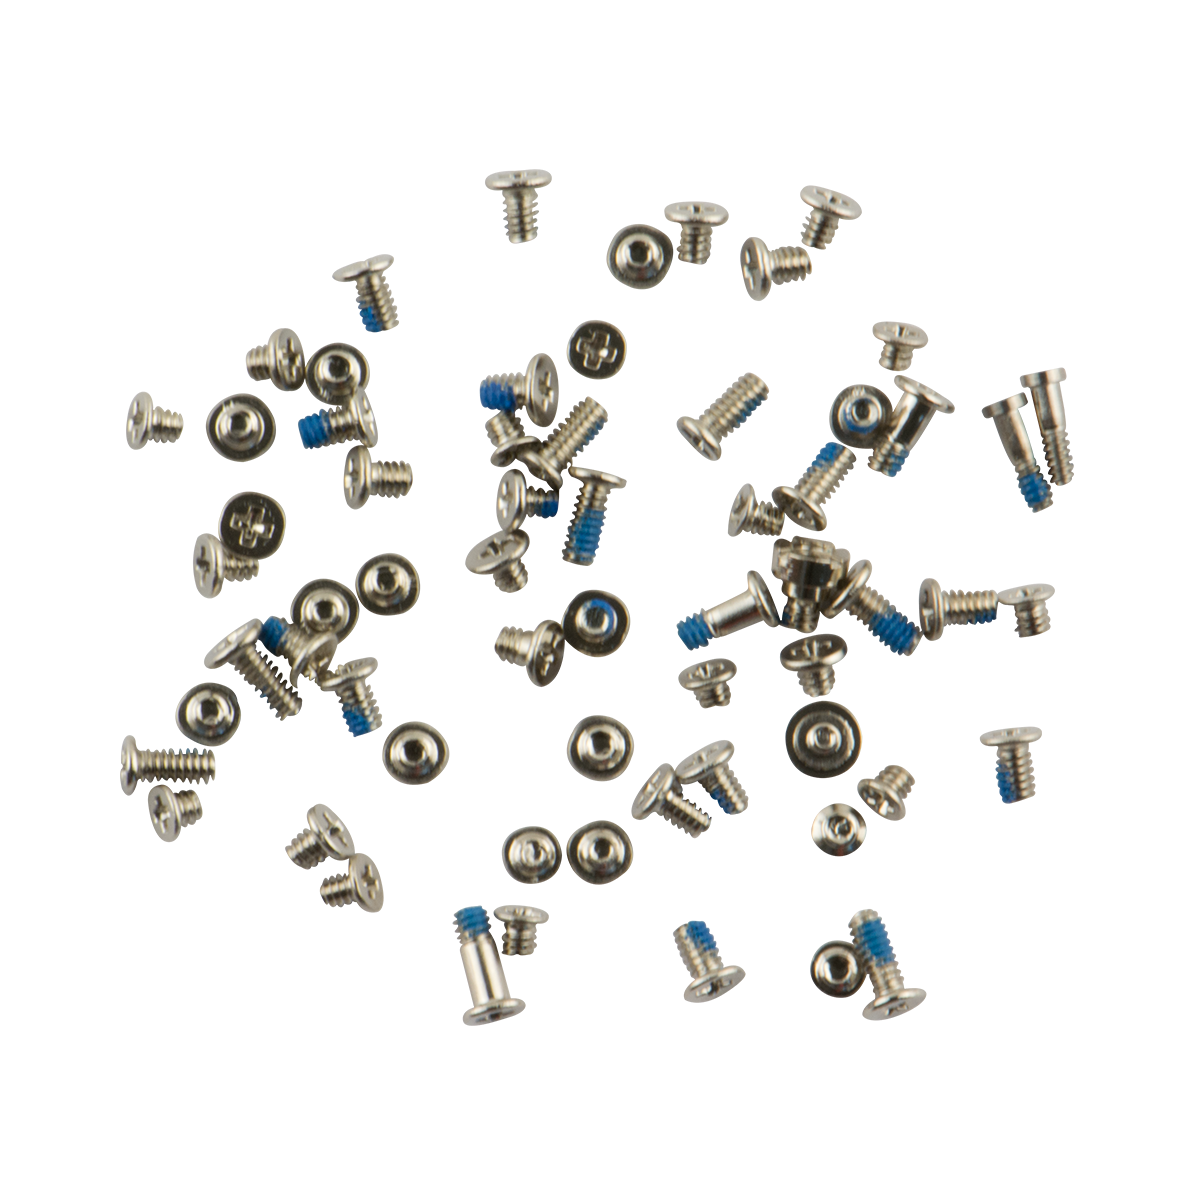 iphone-6-complete-screw-set-silver-2_(2)_RWU99S6VXK31.png